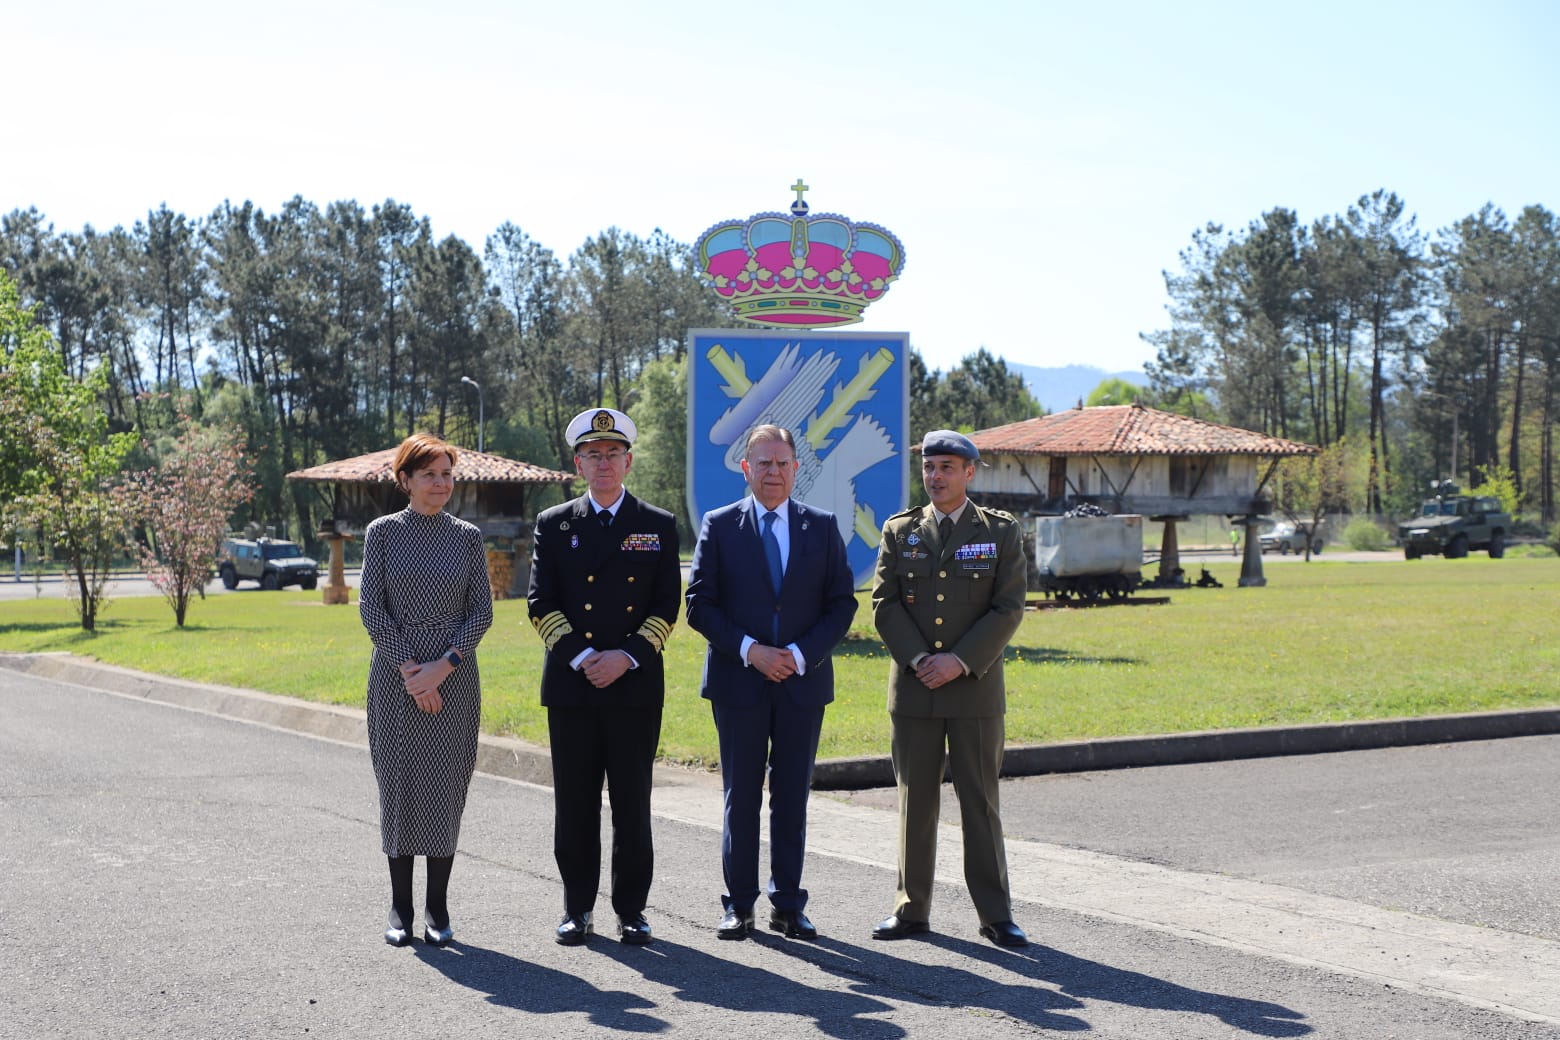 CHOD accompanied by the Mayor of Oviedo, the Mayoress of Gijón and the Chief of the 'Principe' Regiment